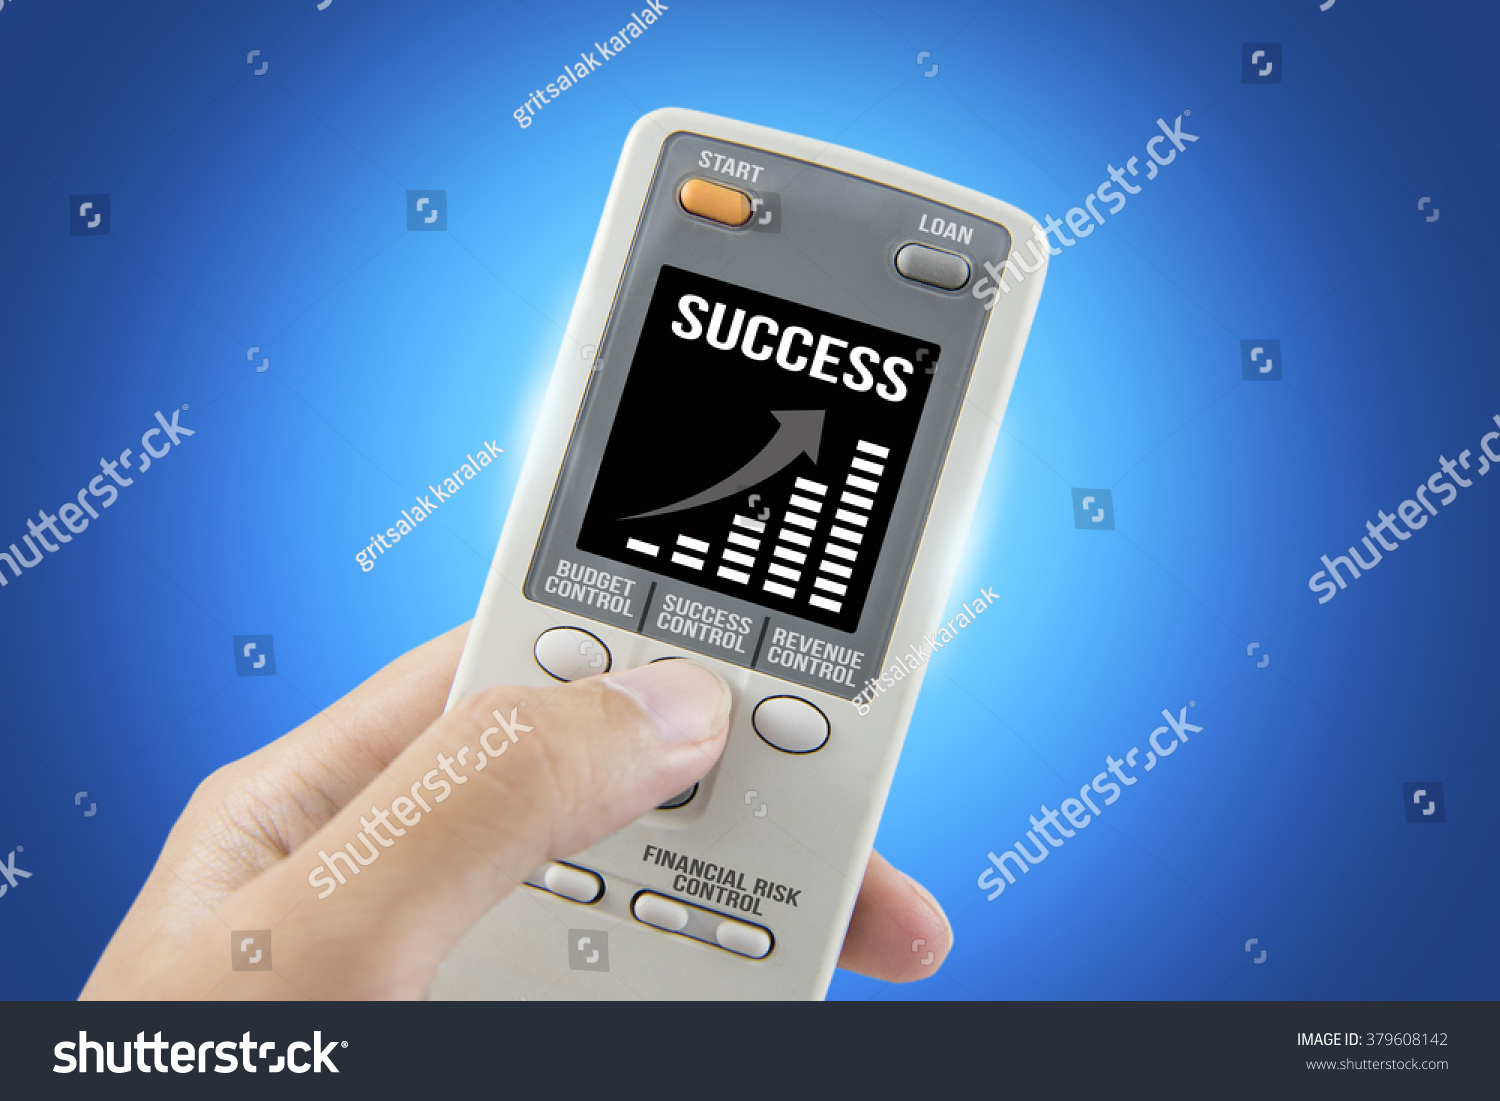 success business remote controller isolated on blue background, clipping path #379608142